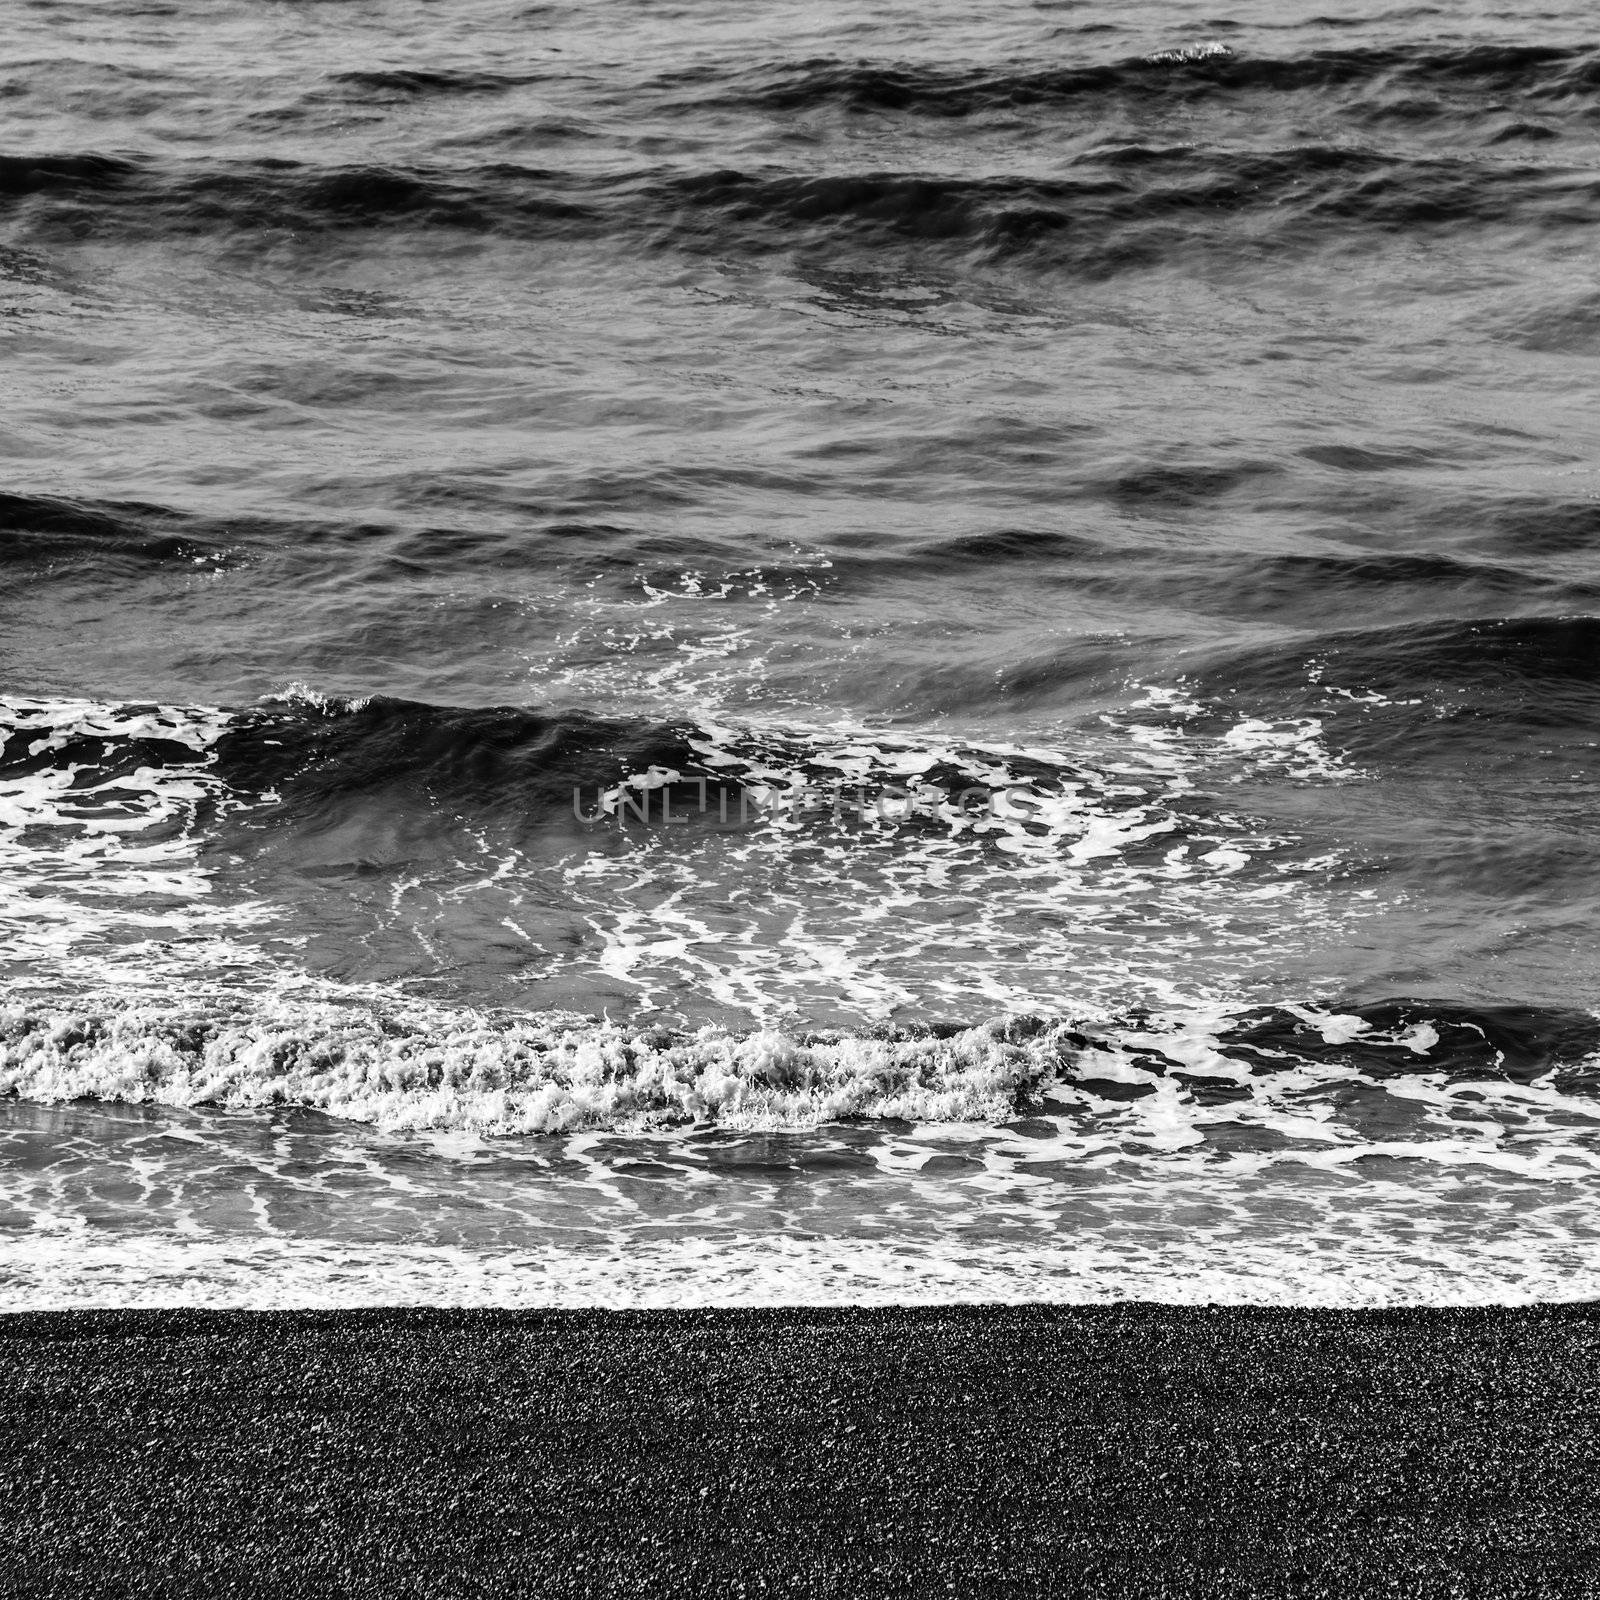 Sea waves and pebble beach in black and white